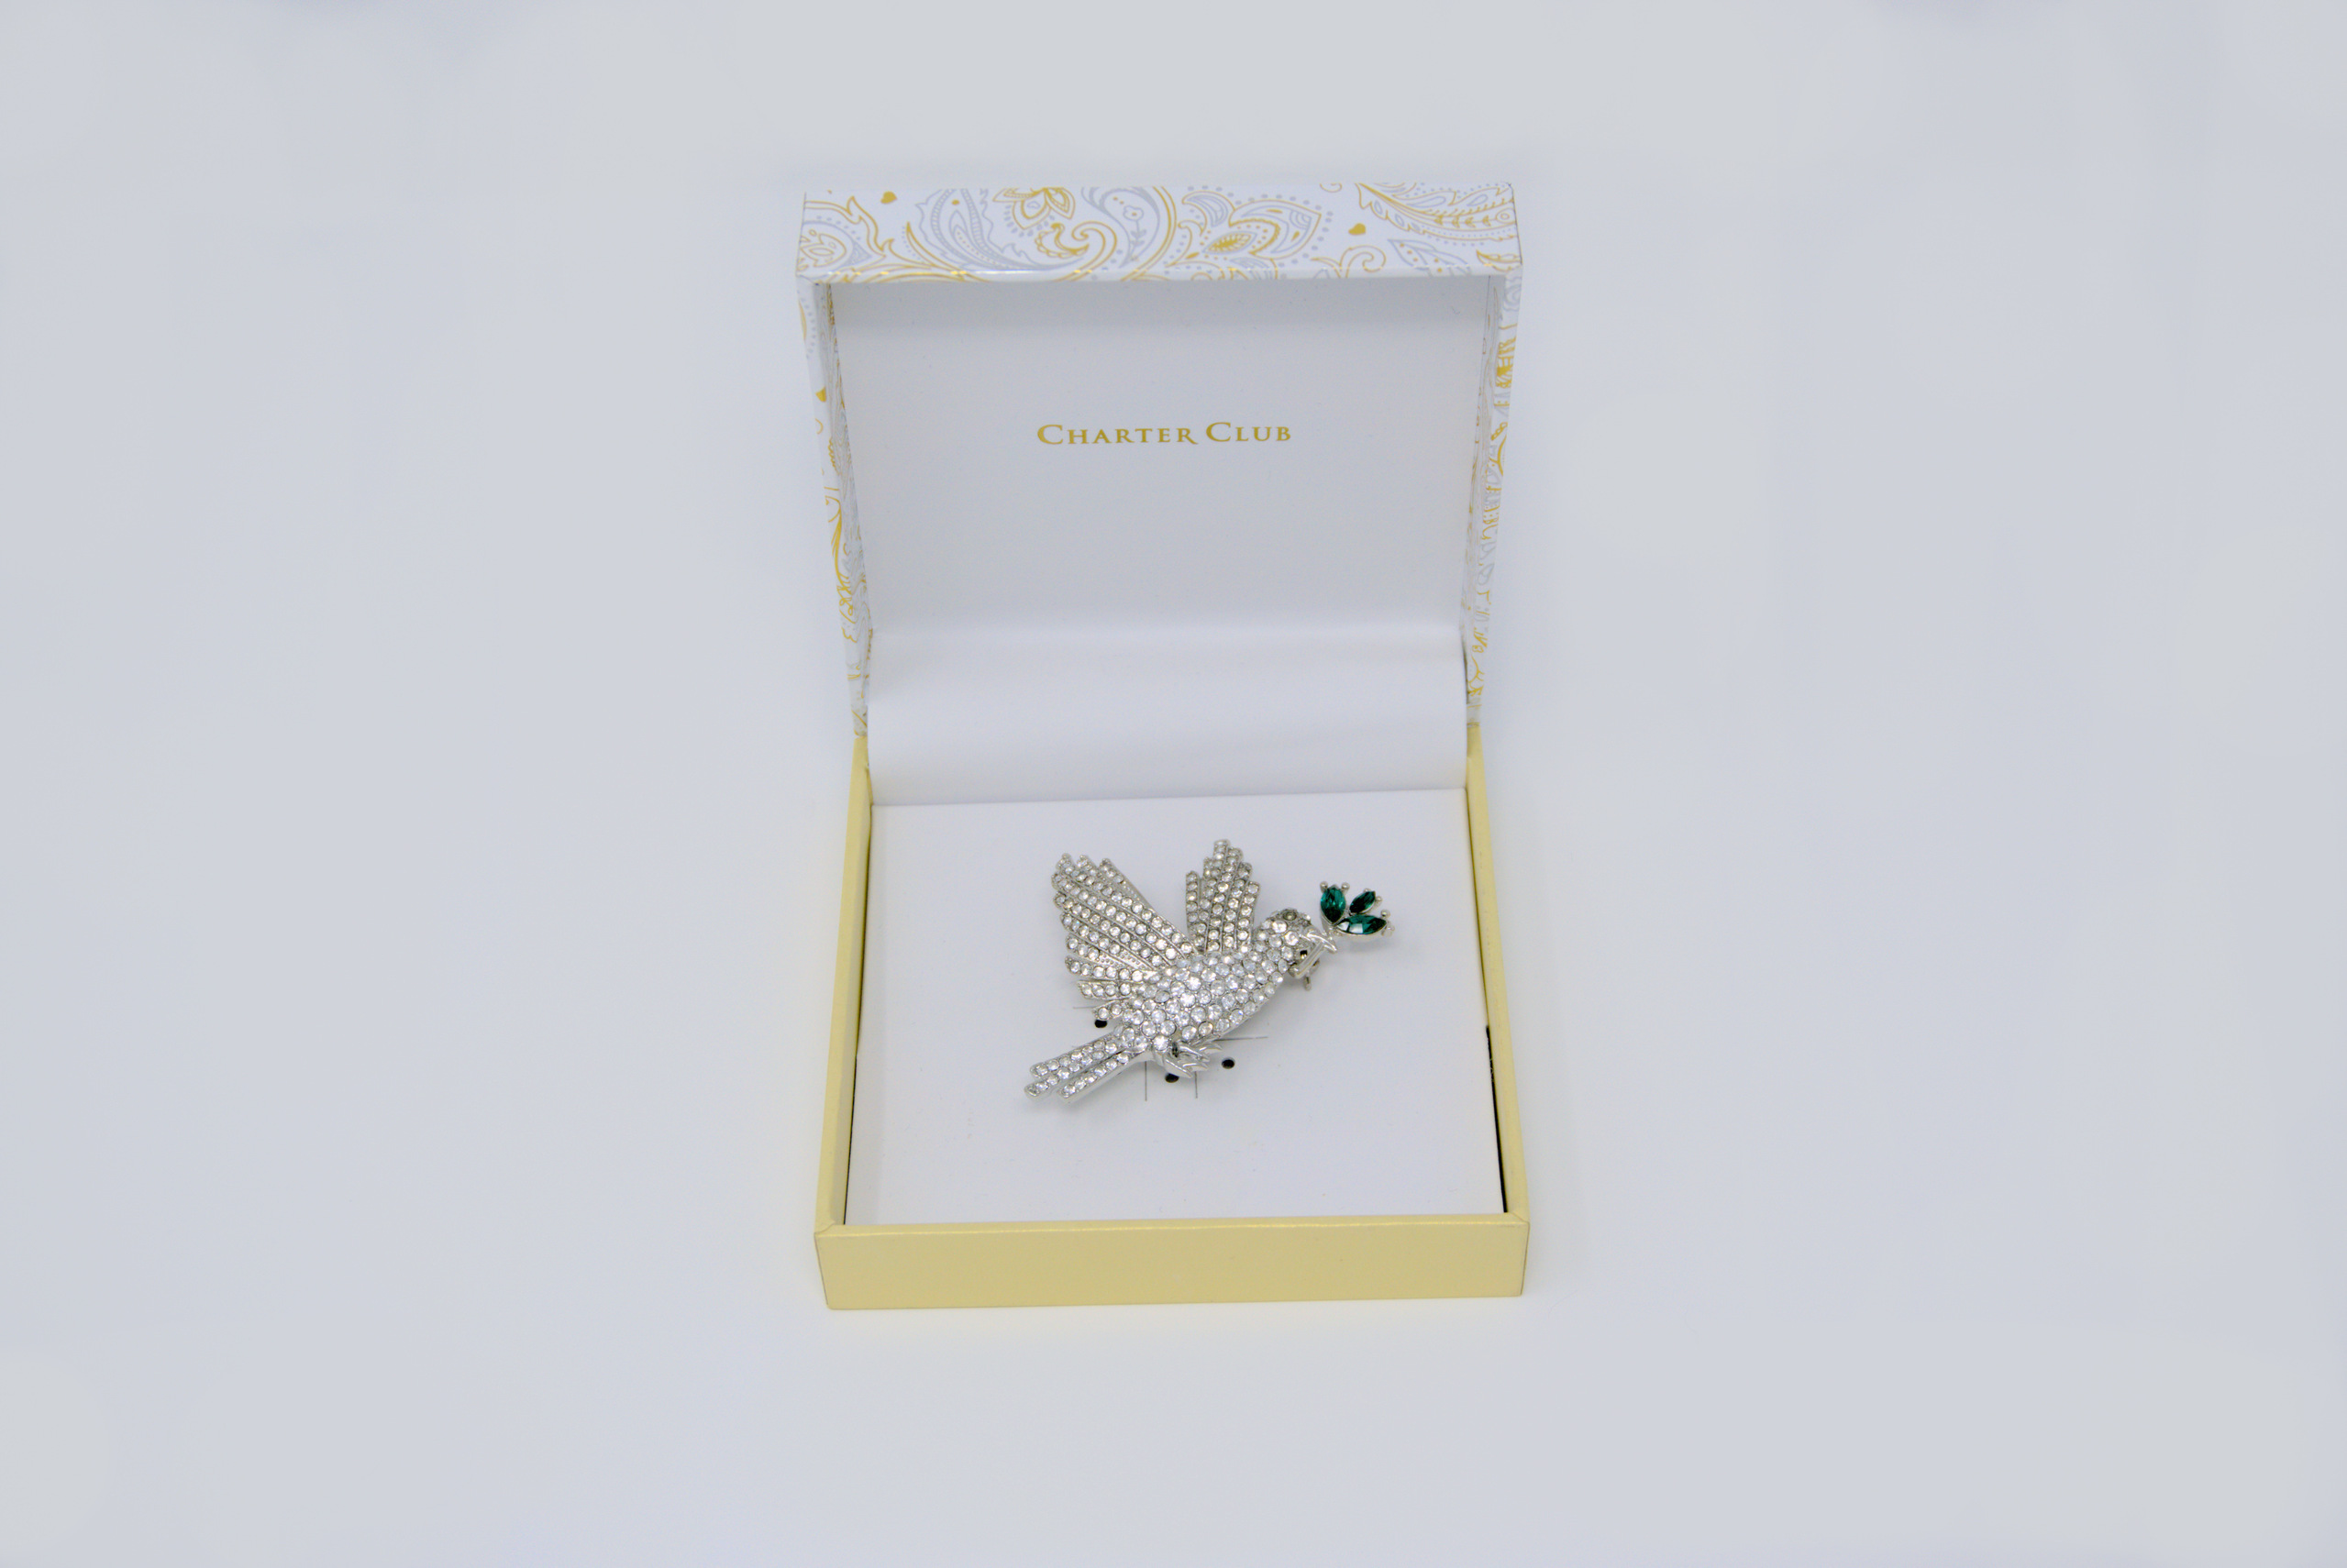 Charm & Lovely Quality Fashion Accessories introduces Charter Club Silver-Tone Crystal Dove